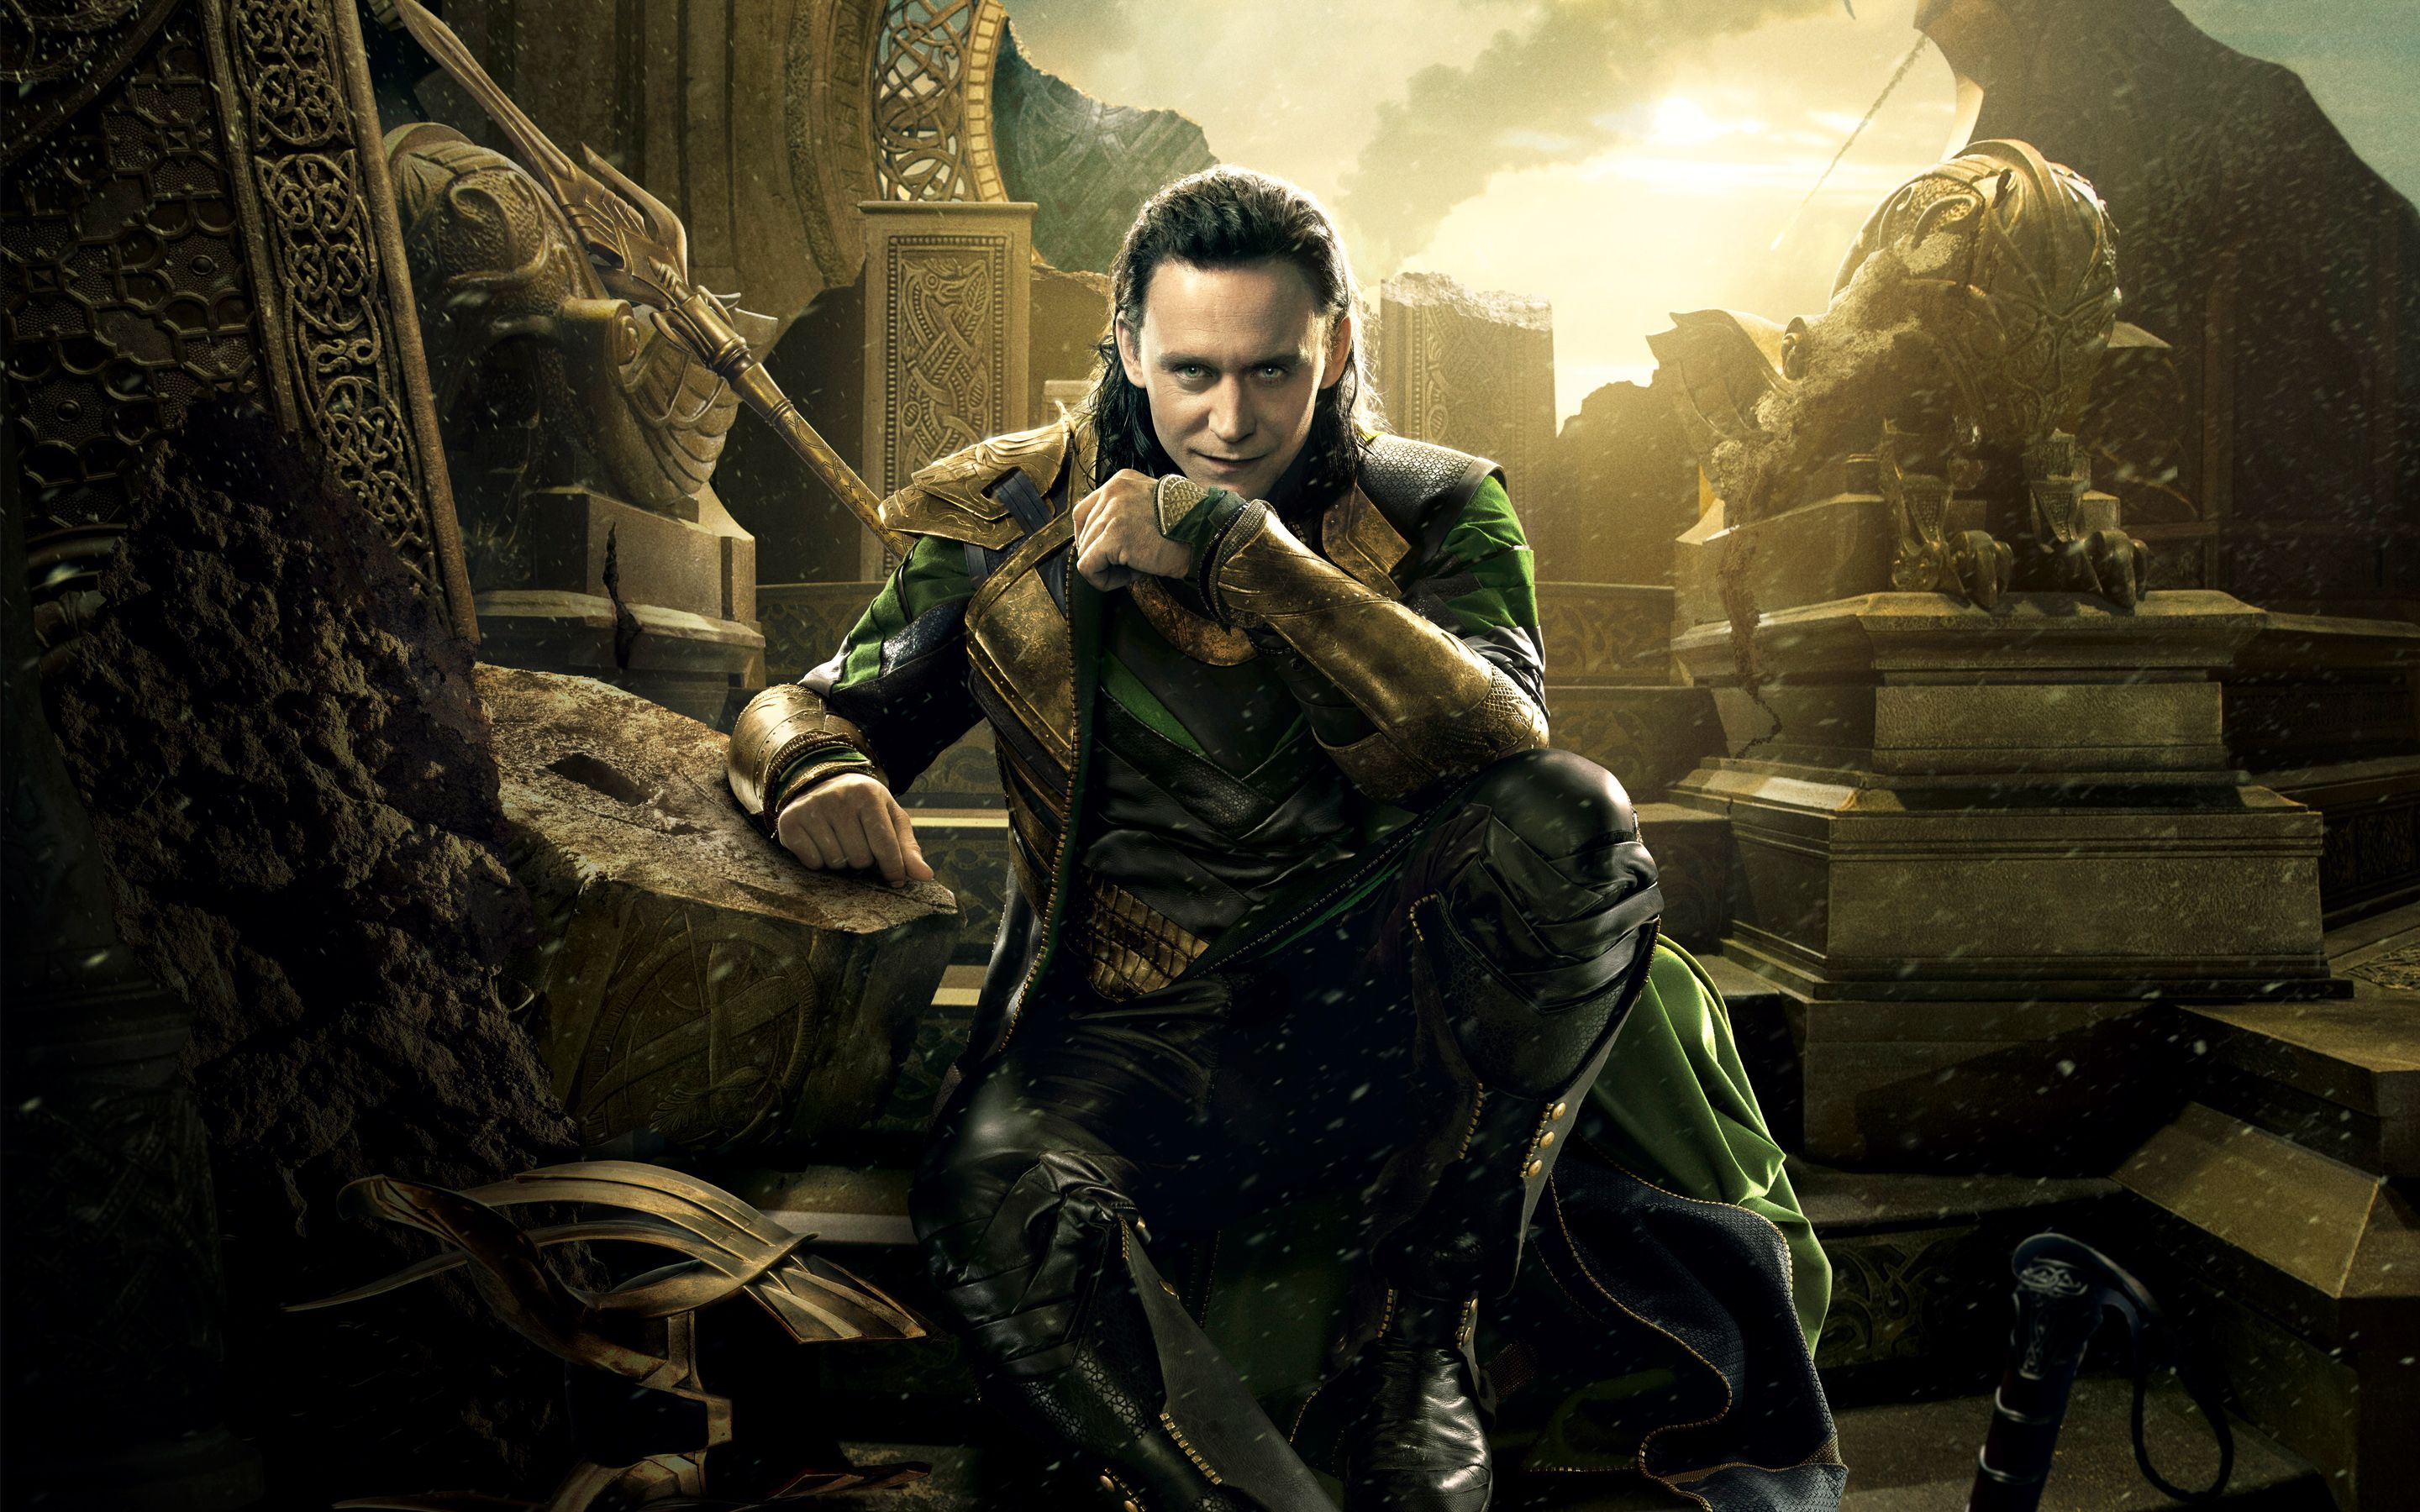 Loki 4K wallpaper for your desktop or mobile screen free and easy to download